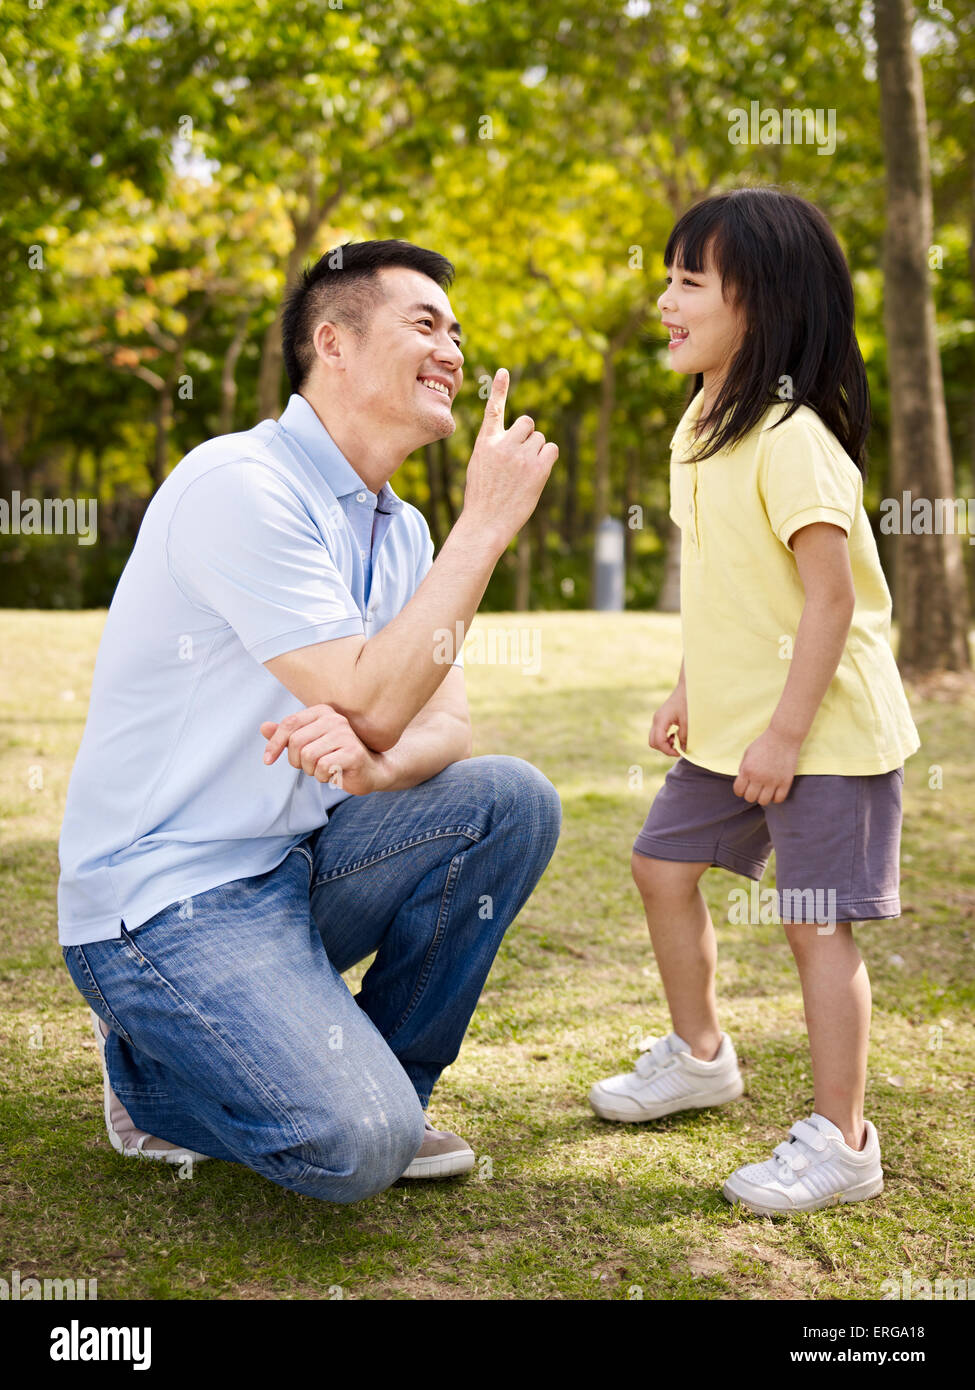 asian father and daughter having a conversation outdoors. Stock Photo